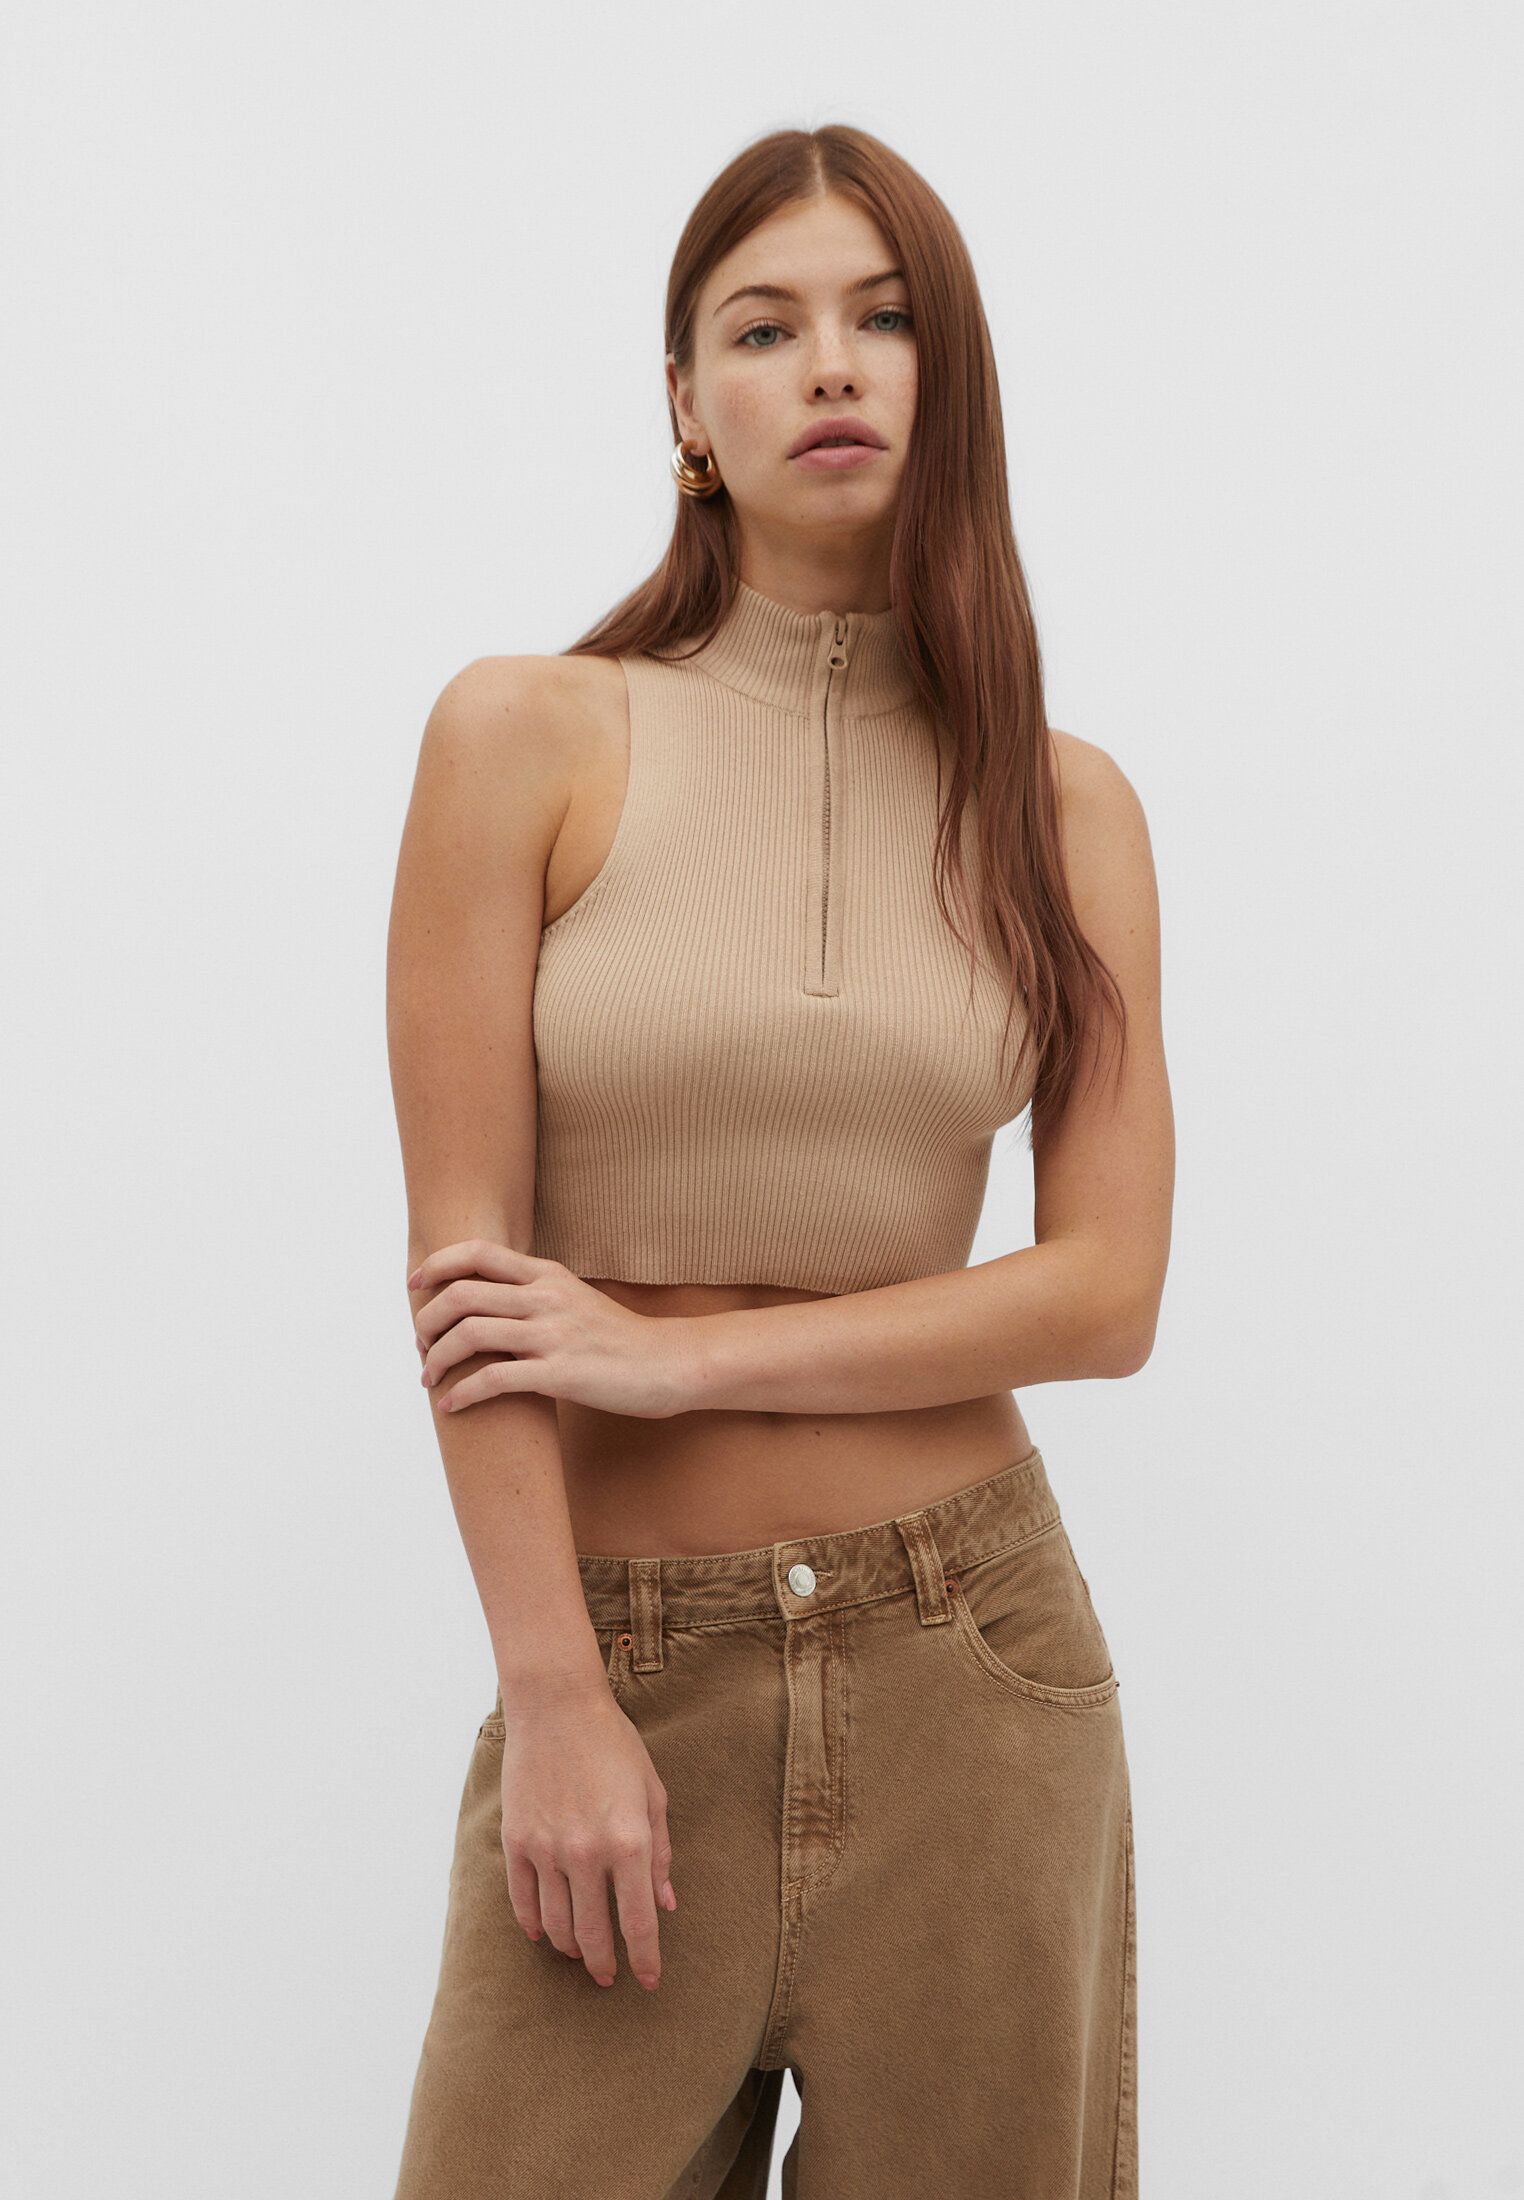 Square Neck Crop Top, Minimal Knit Top, Hand Knit Bralette Top